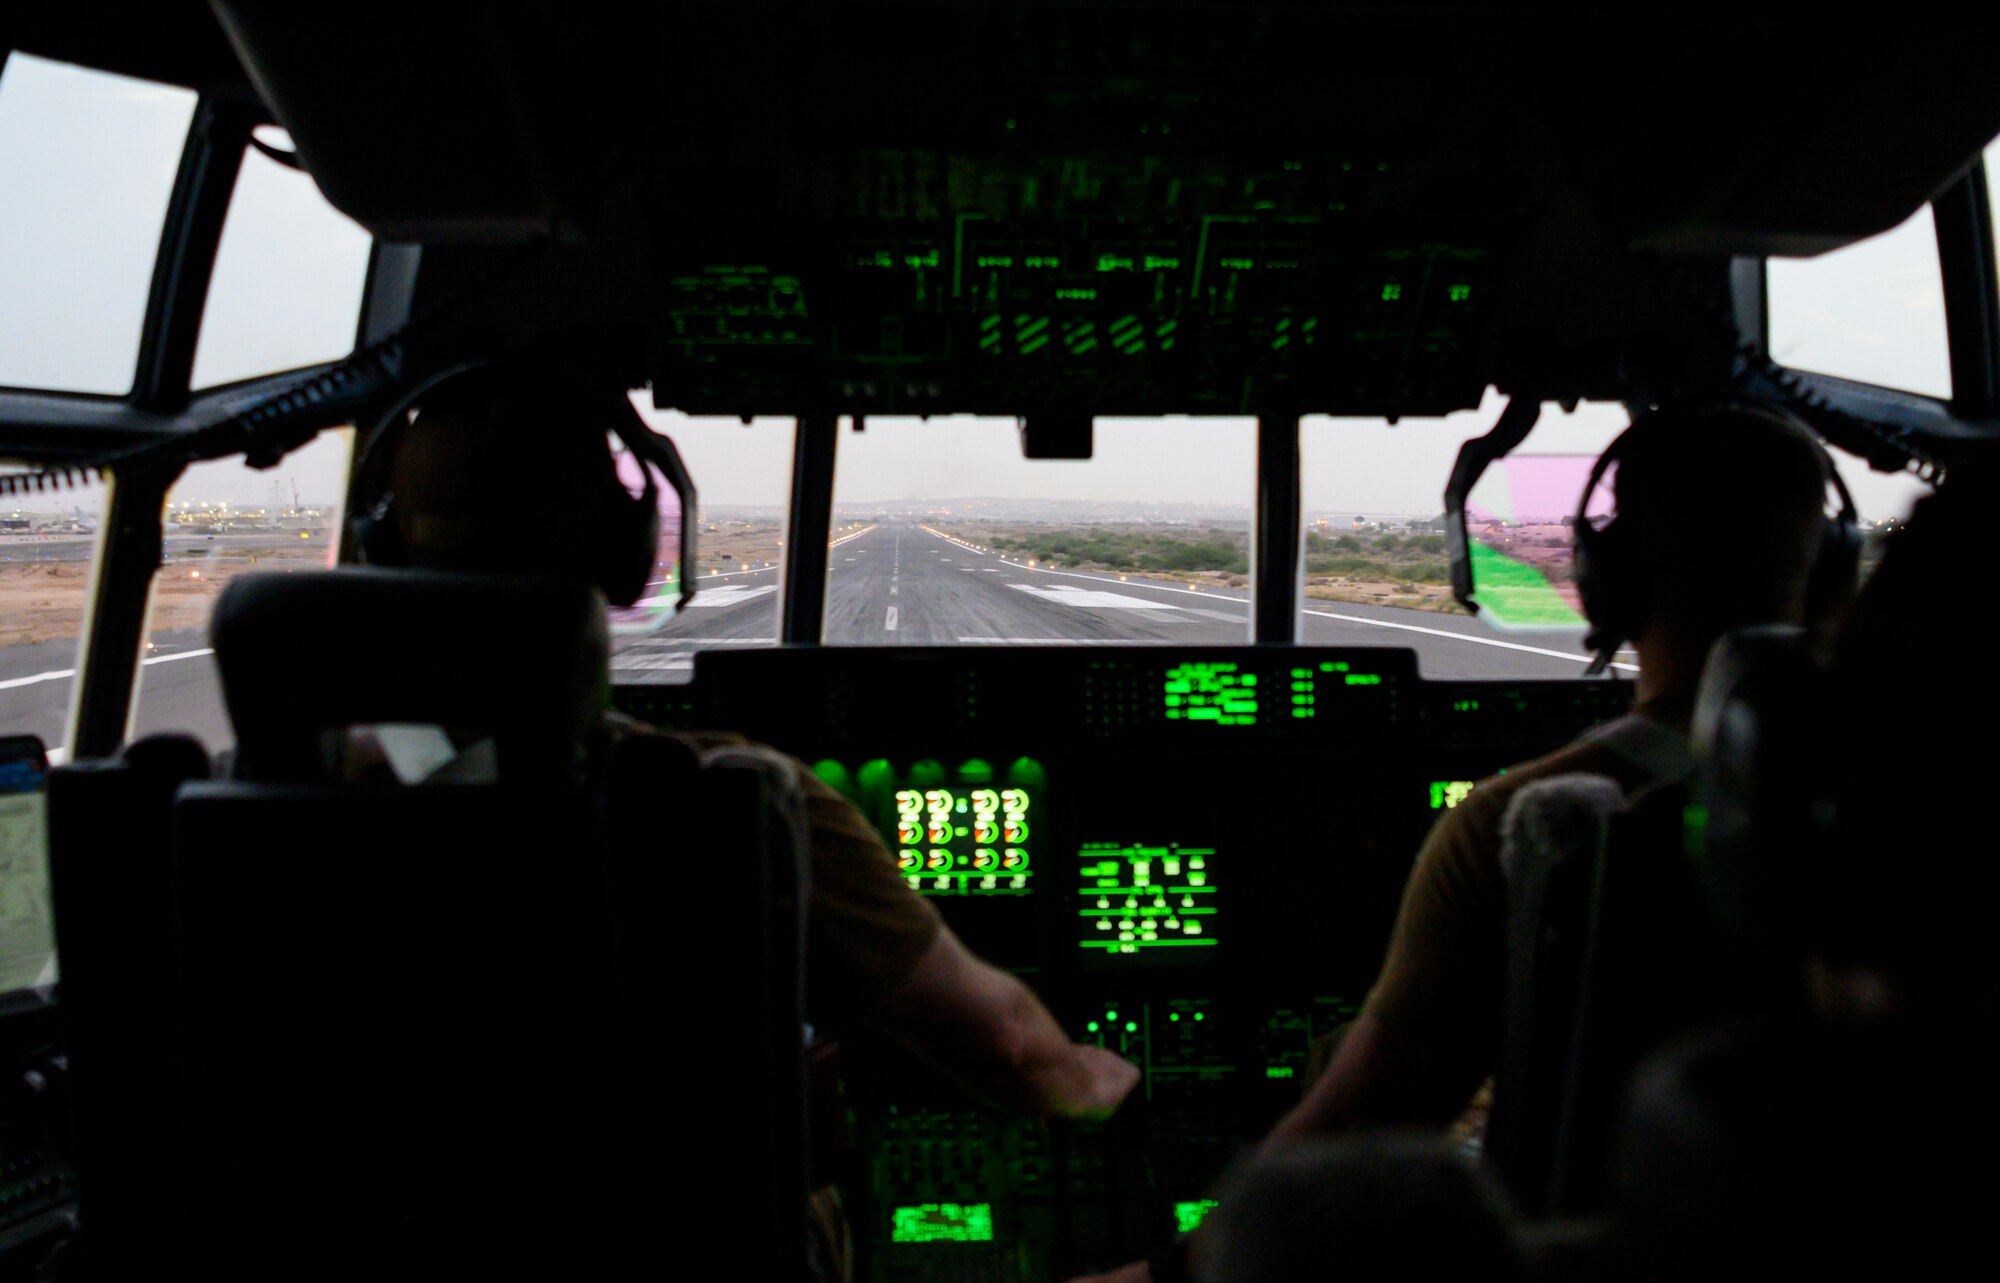 U.S. Air Force 75th Expeditionary Airlift Squadron (EAS) pilots prepare for takeoff on a C-130J Super Hercules at Camp Lemonnier, Djibouti, June 28, 2020. The 75th EAS provides strategic airlift capabilities across the Combined Joint Task Force - Horn of Africa (CJTF-HOA) area of responsibility. (U.S. Air Force photo by Tech. Sgt. Christopher Ruano)